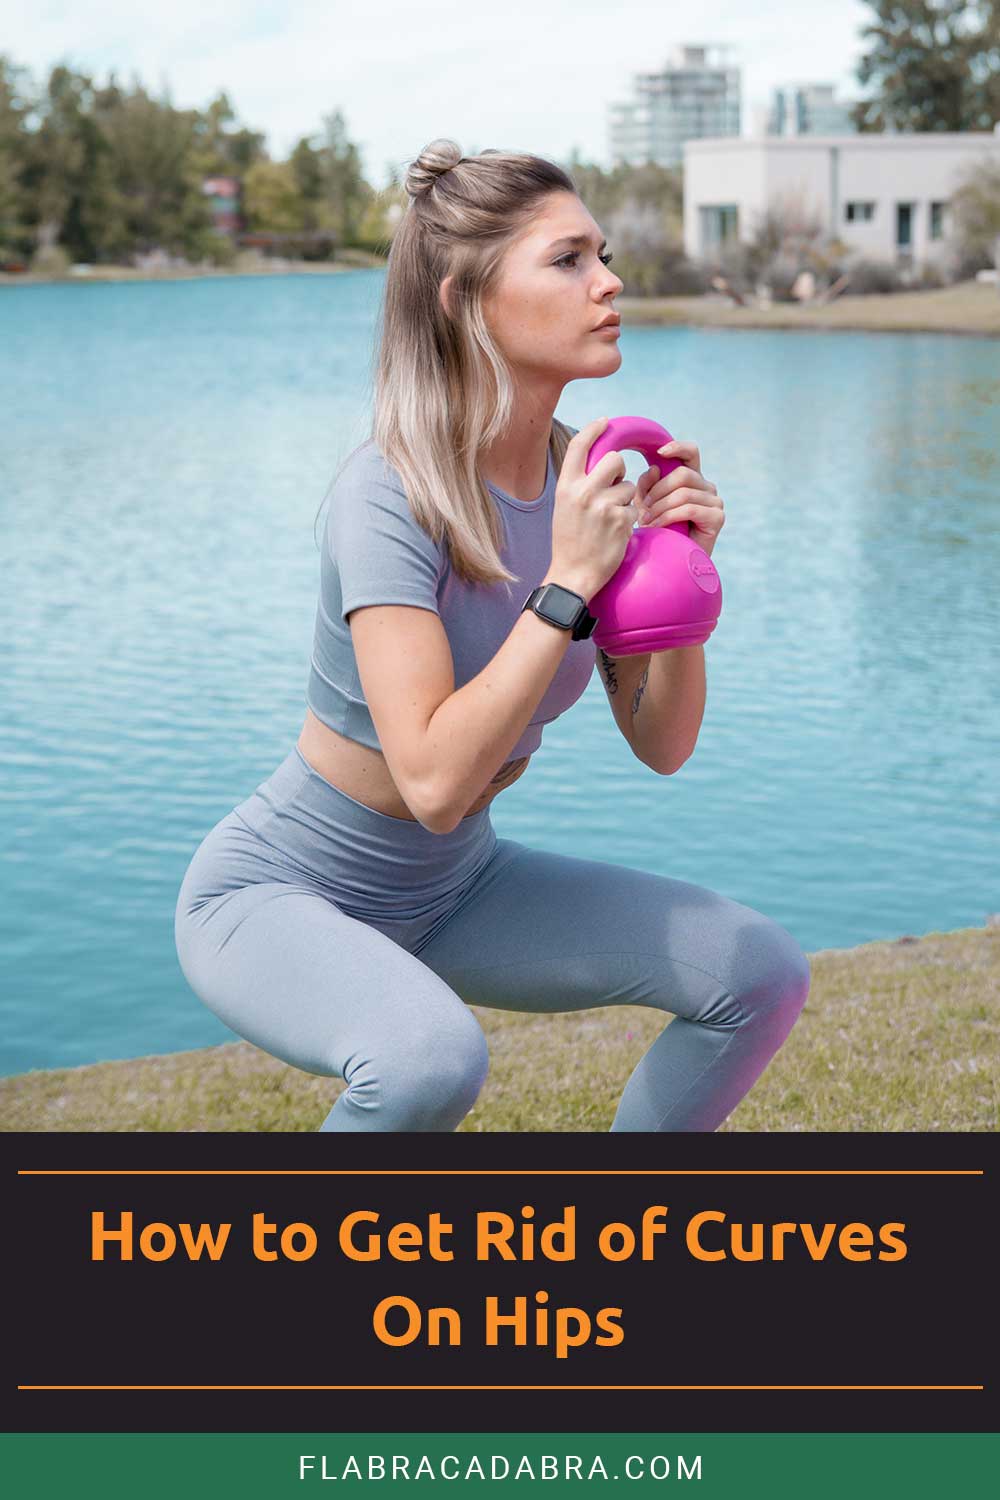 How to Get Rid of Curves On Hips